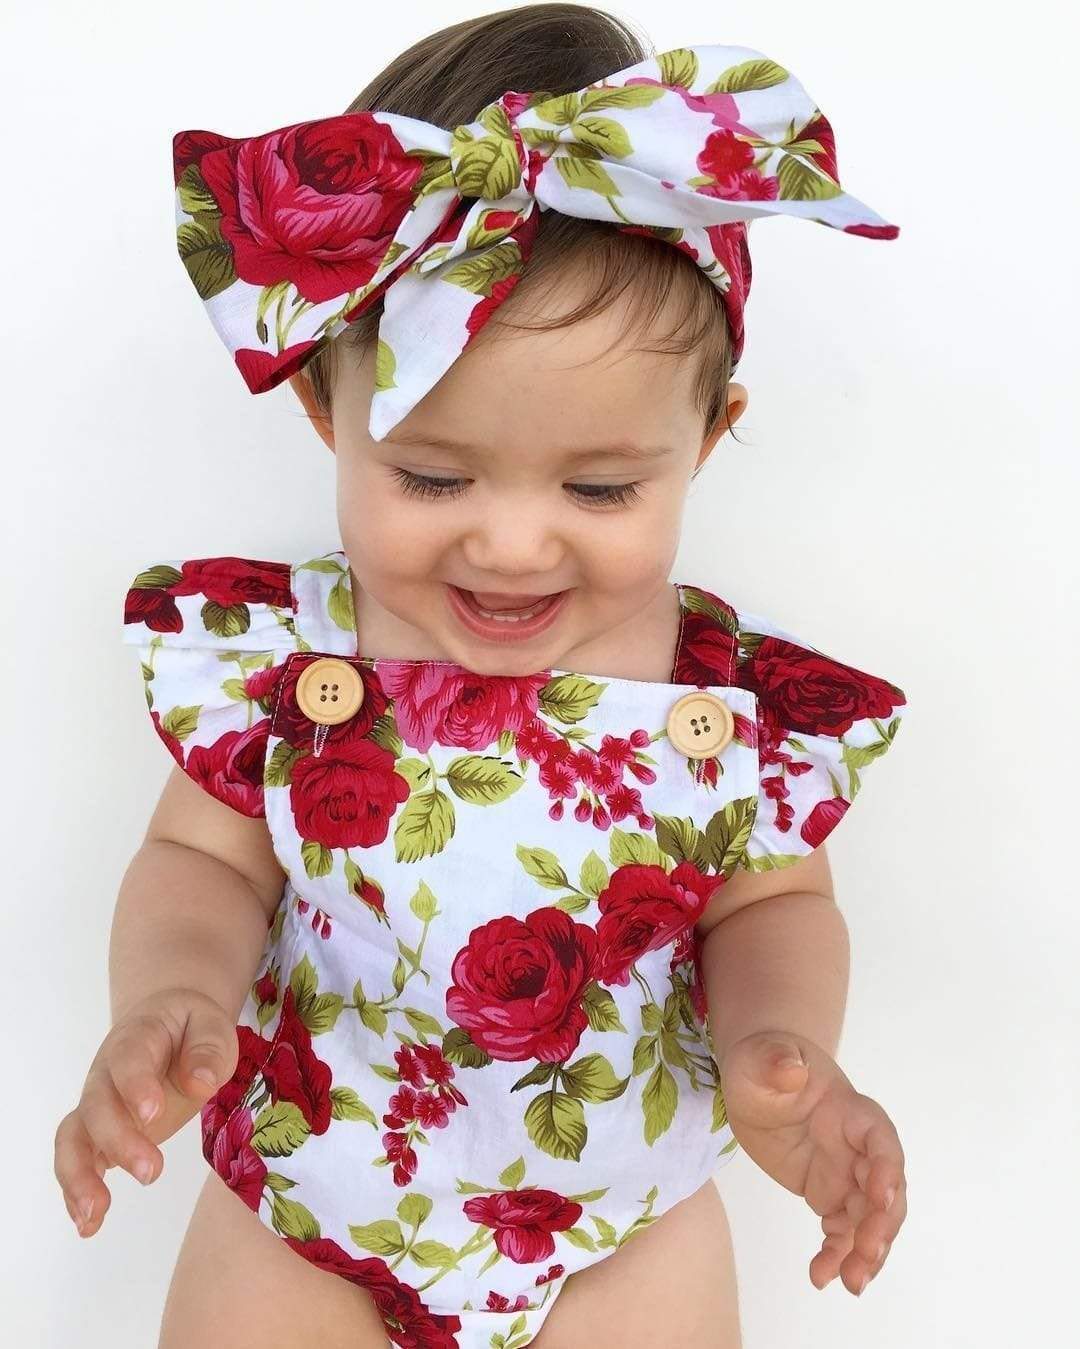 Mindful Yard Rompers Floral Baby Girl Romper With Bow Headband